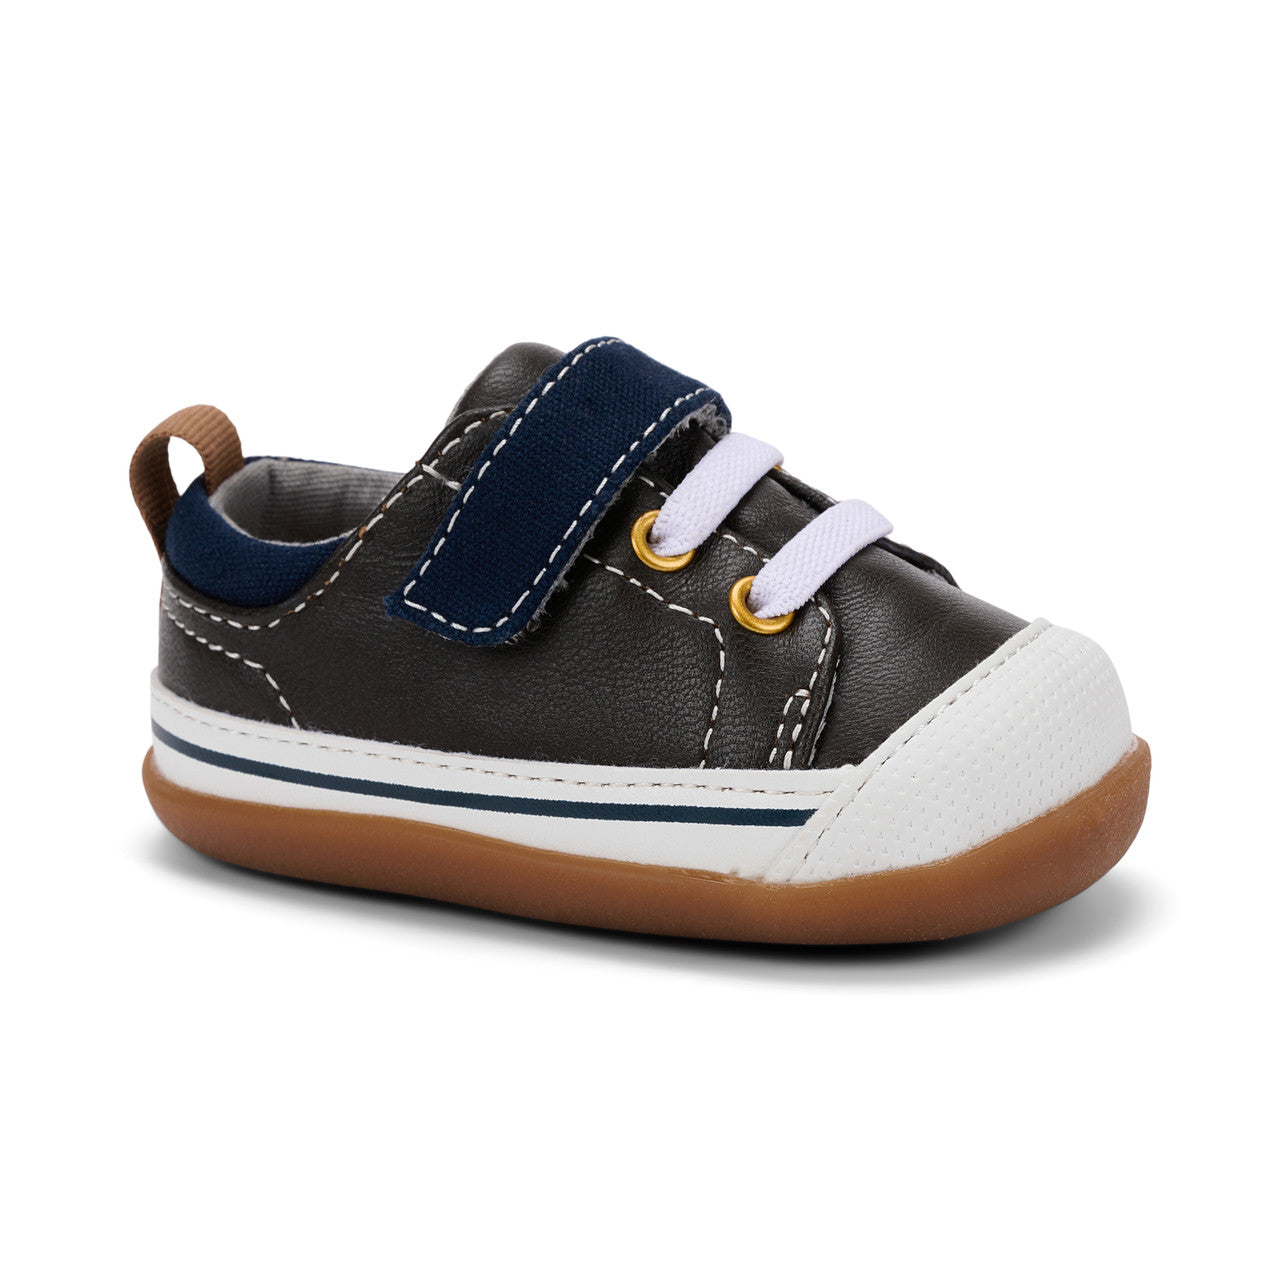 Stevie First Walker - Brown Leather/Blue